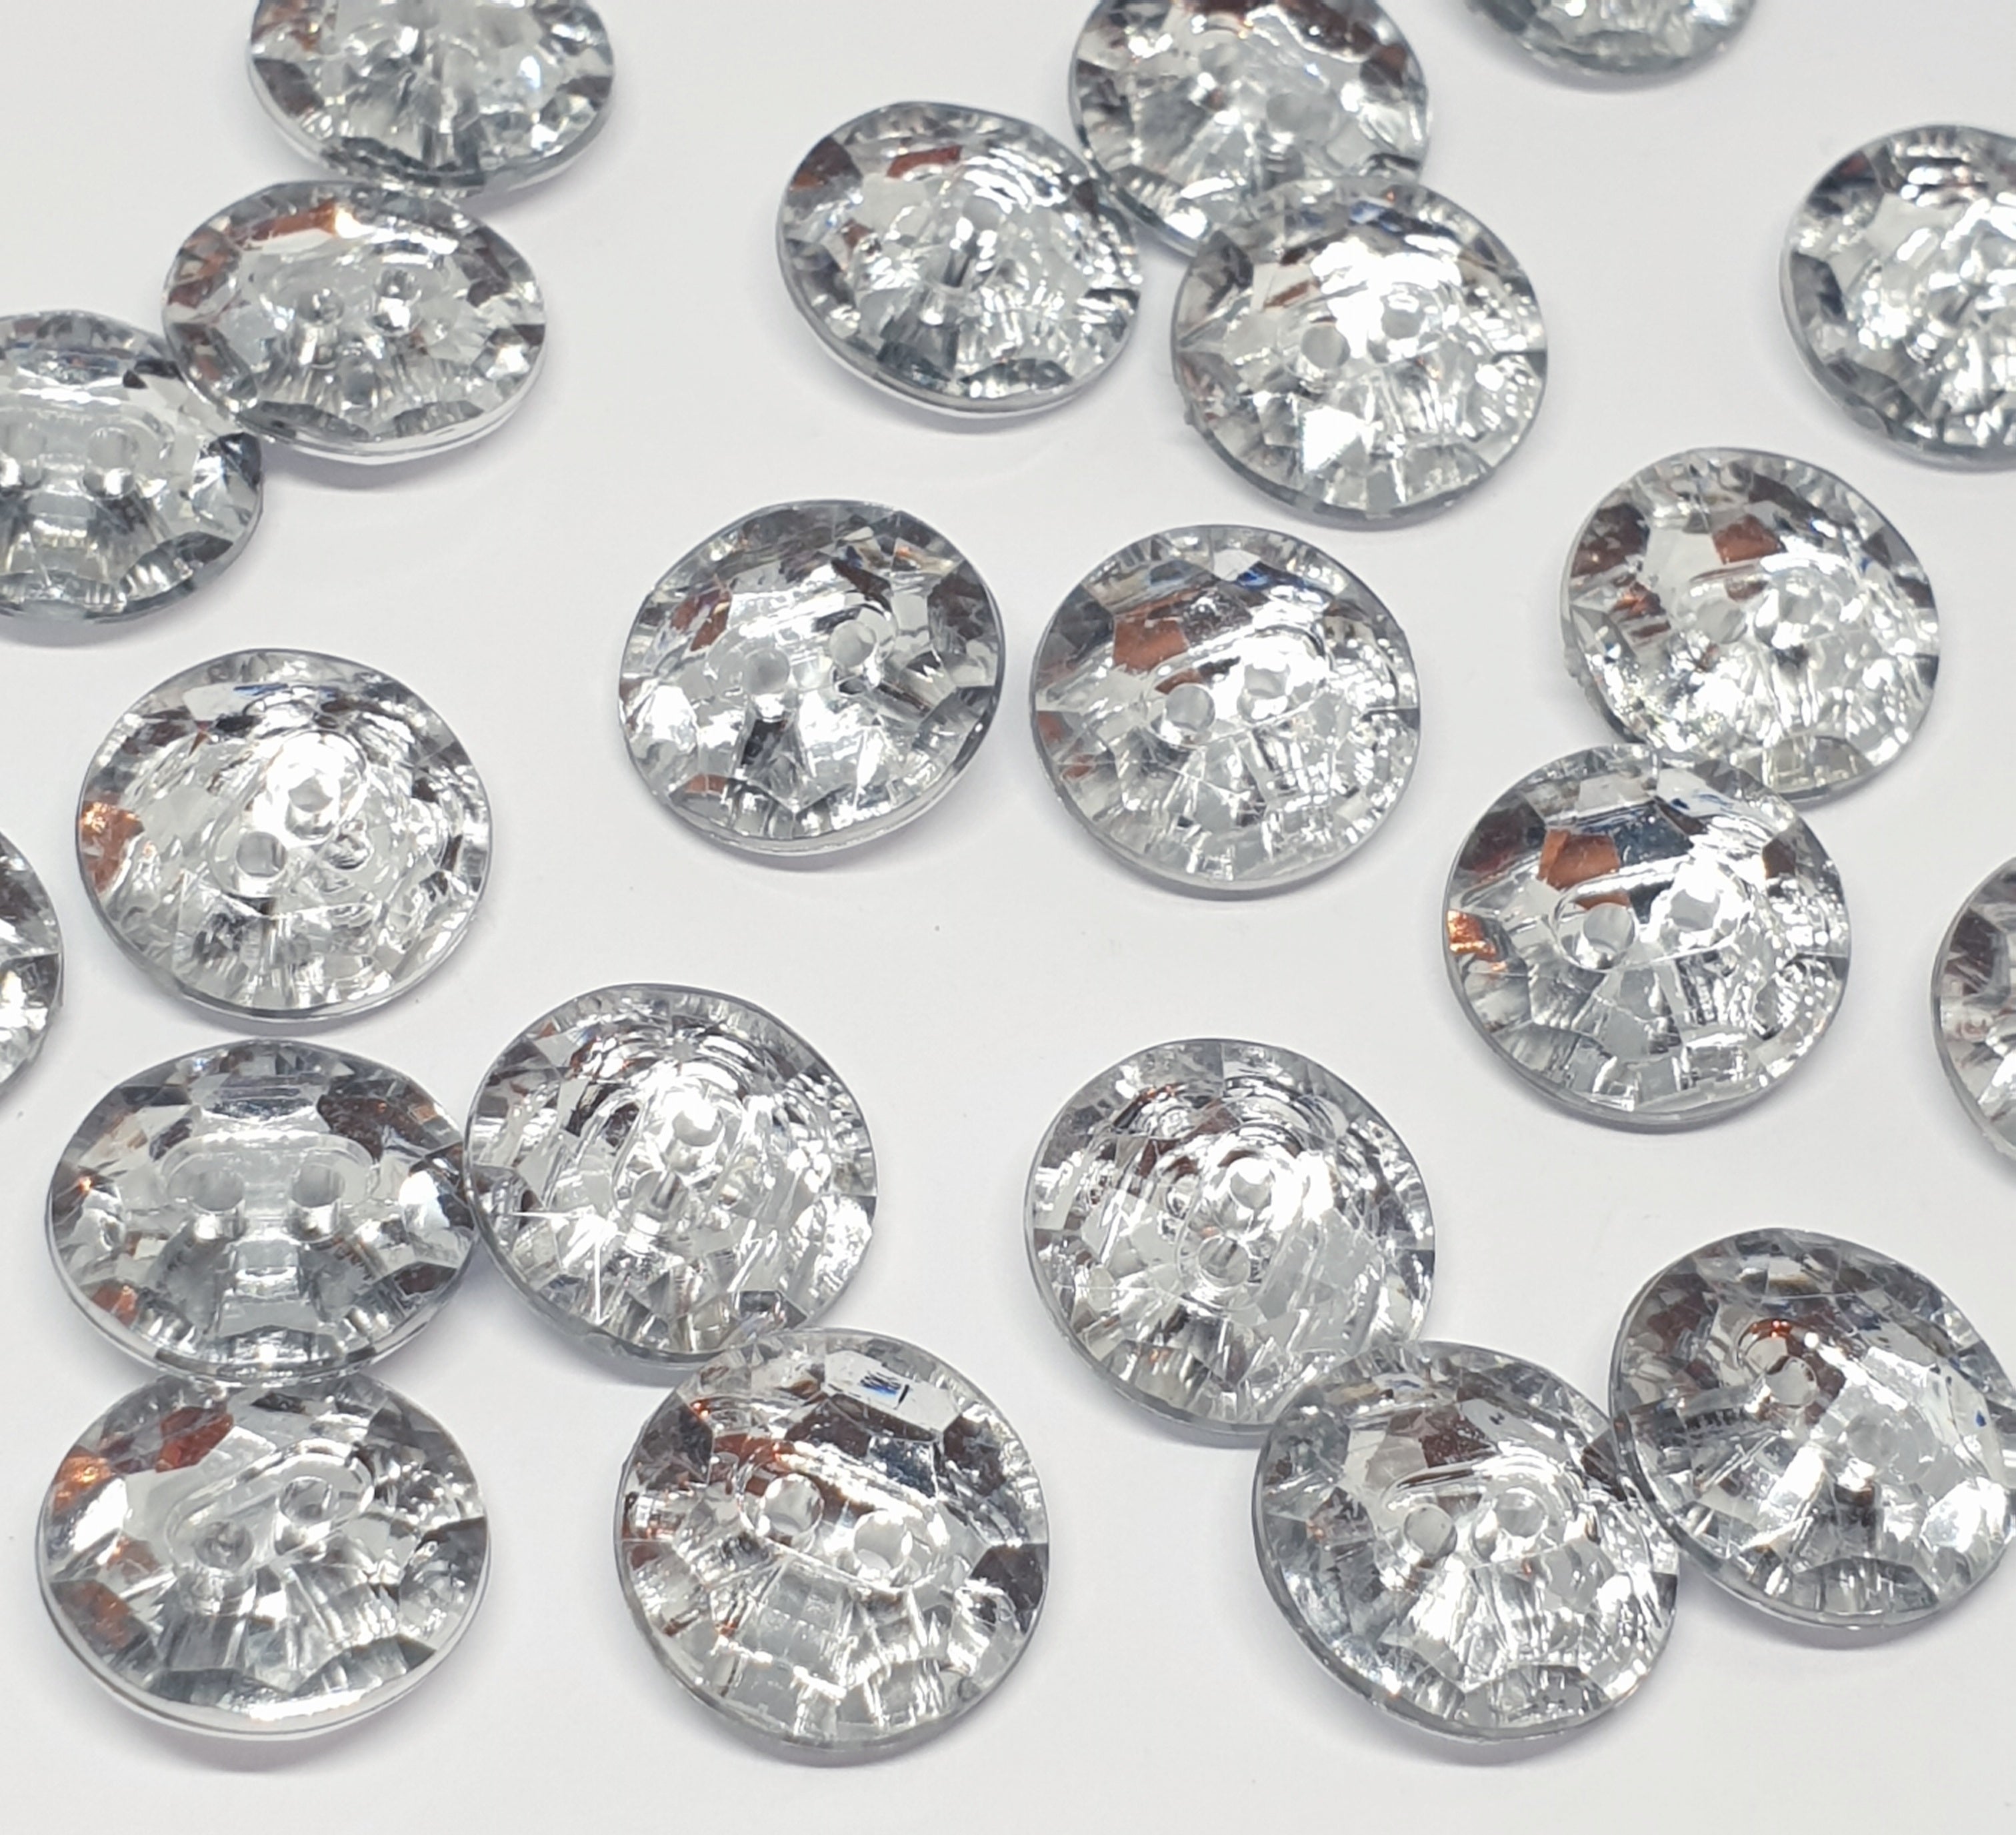 MajorCrafts 40pcs 18mm Crystal Clear Faceted 2 Holes Round Acrylic Sewing Buttons